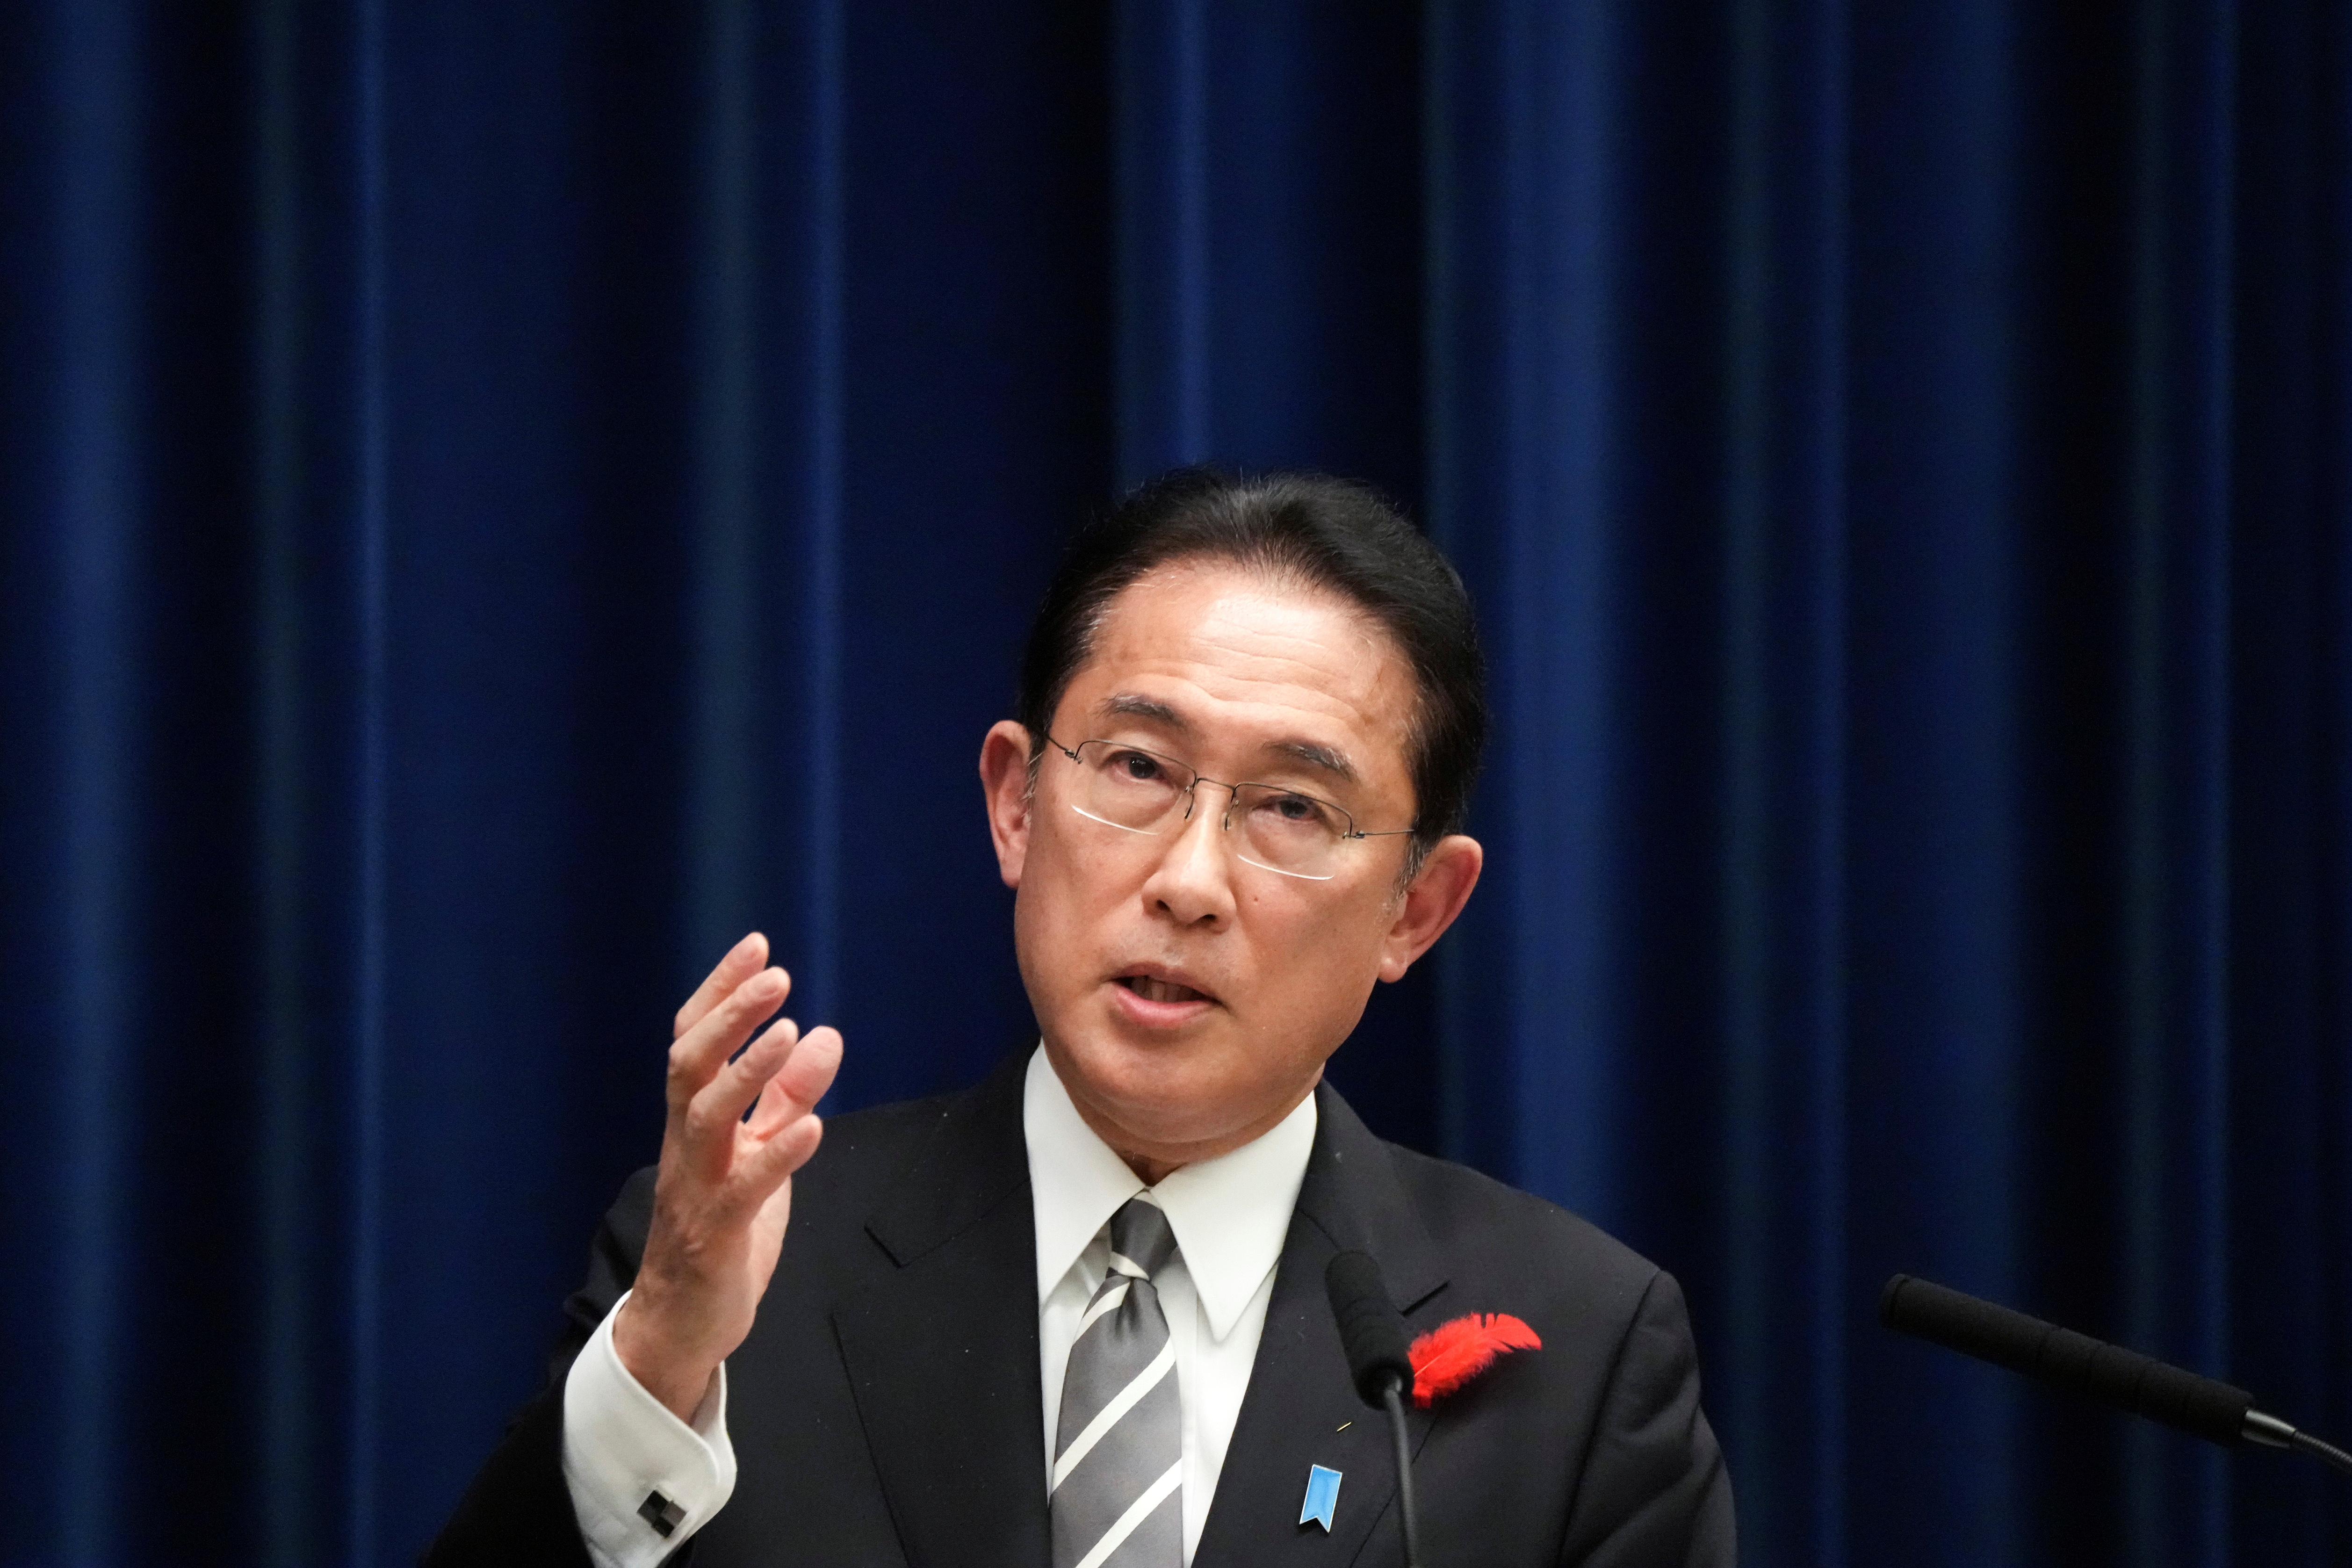 Japanese Prime Minister Fumio Kishida speaks during a news conference at the prime minister's official residence in Tokyo, Japan October 14, 2021. Eugene Hoshiko/Pool via REUTERS